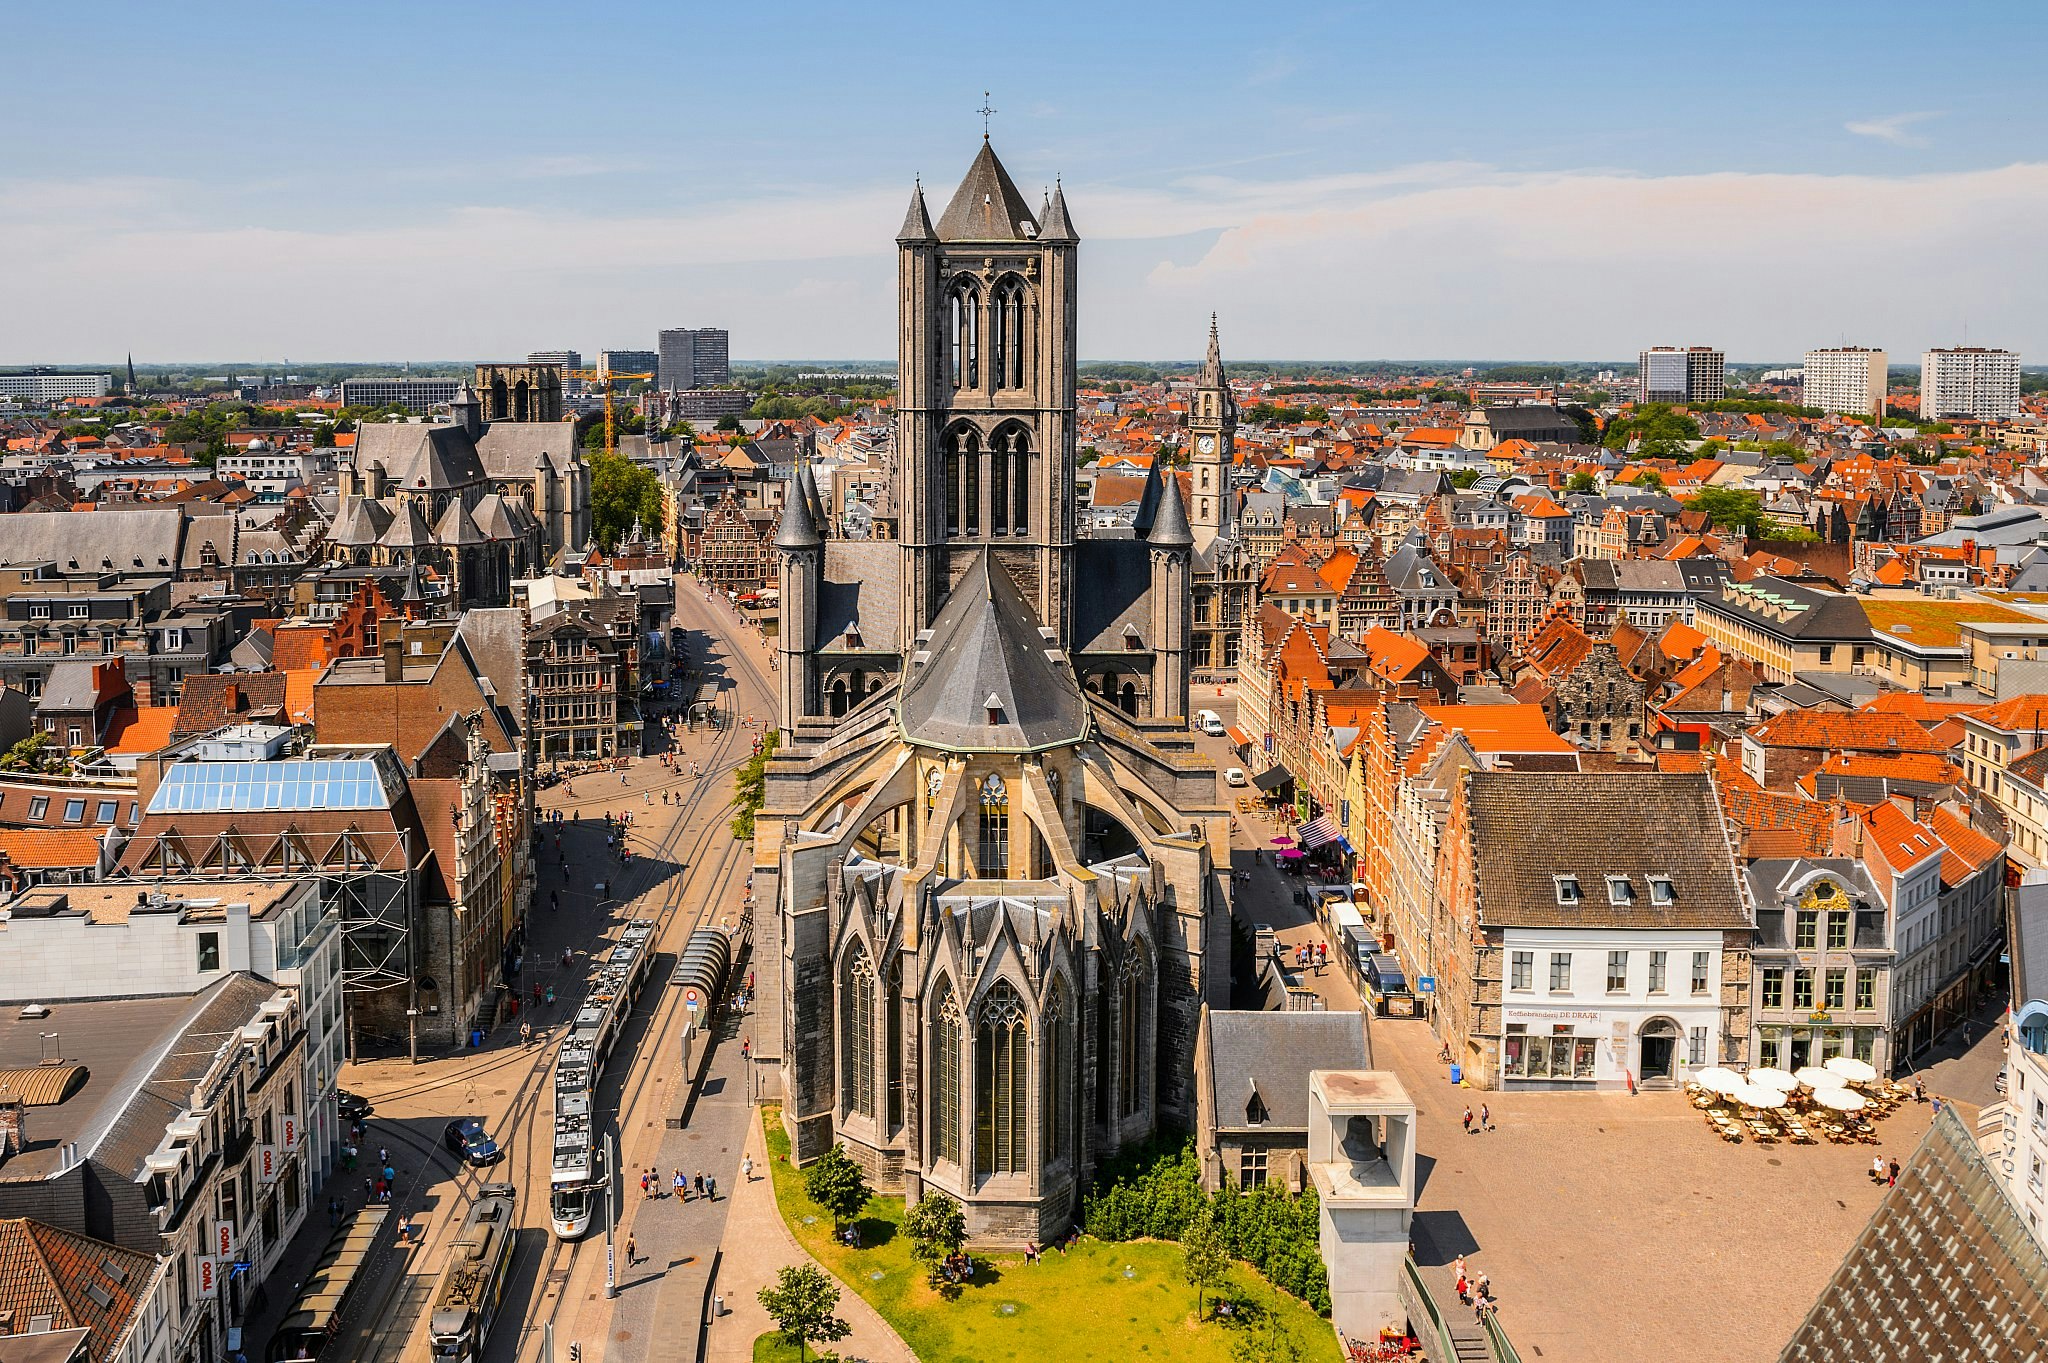 The grey stone St Bavo Cathedral rising majestically above the medieval old town of Ghent which surrounds it.